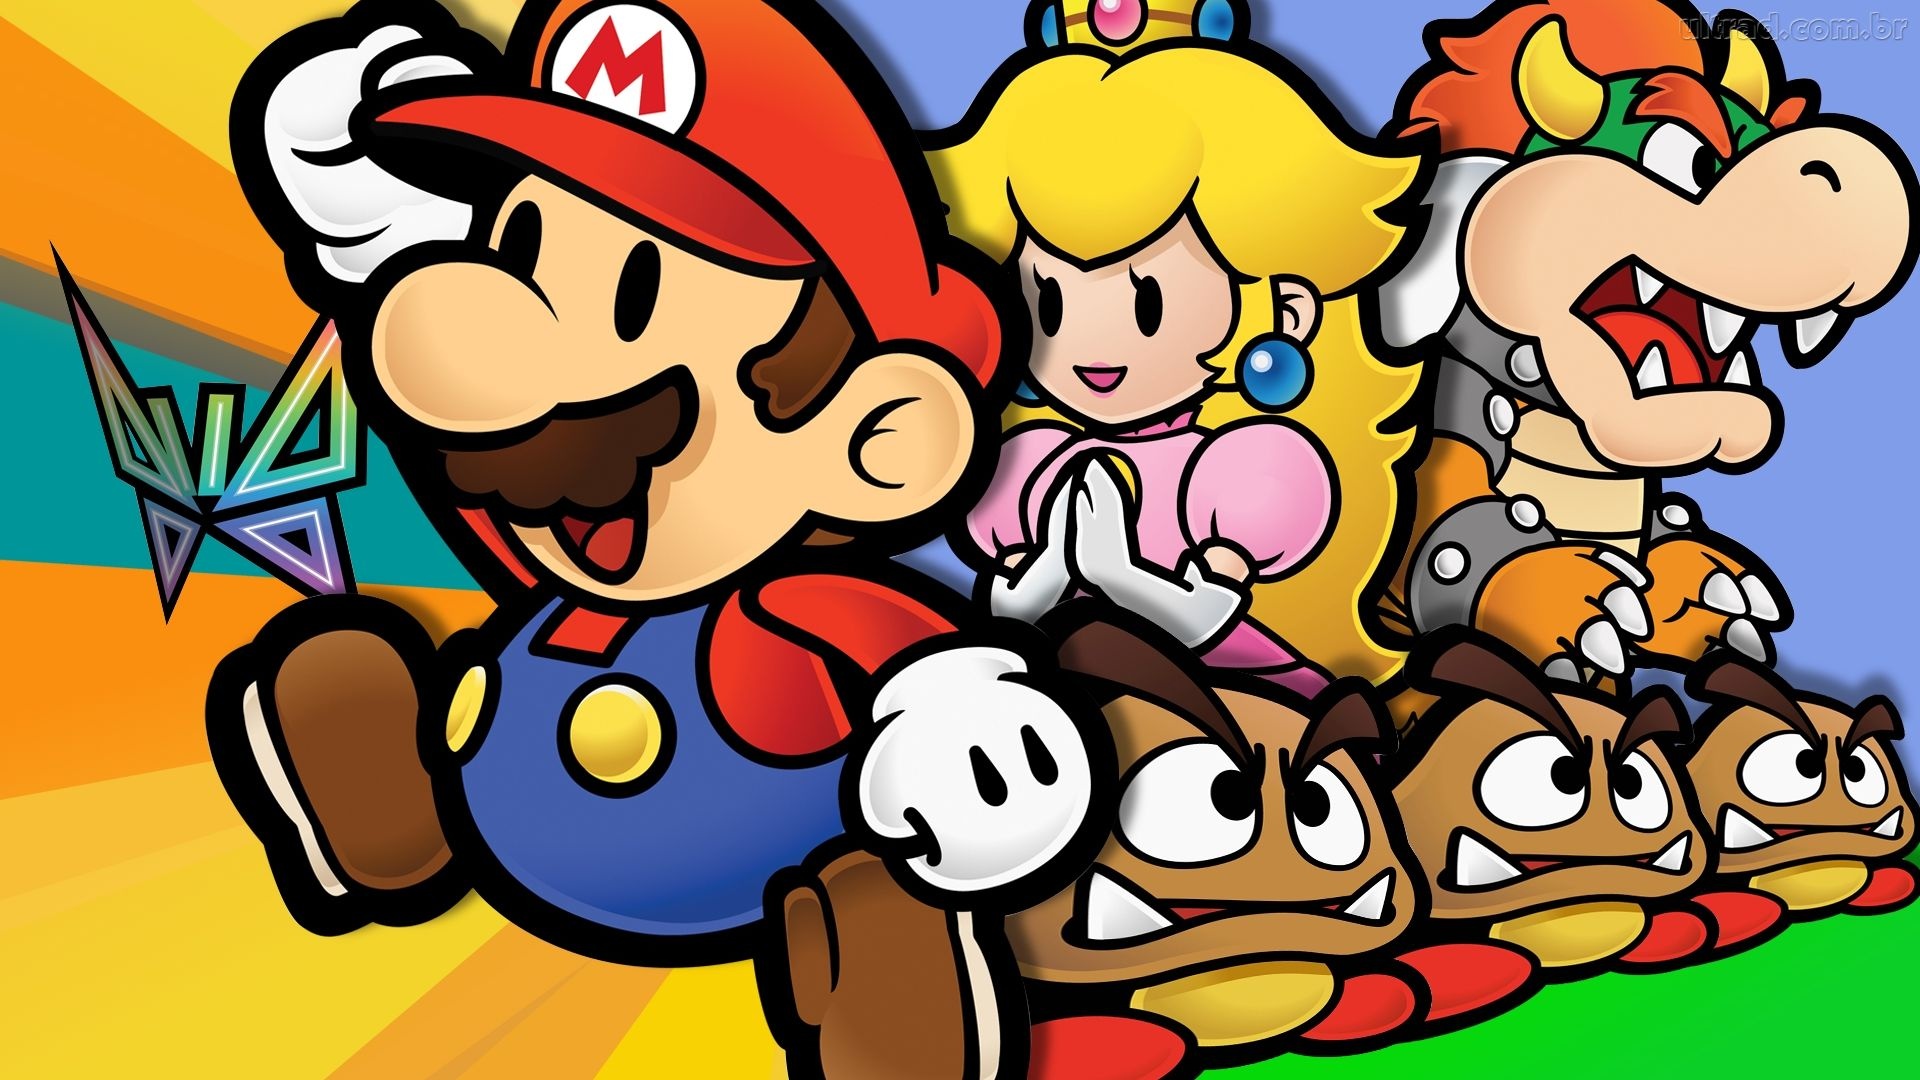 Goomba: Super Mario Bros characters, A platform game developed and published by Nintendo. 1920x1080 Full HD Background.